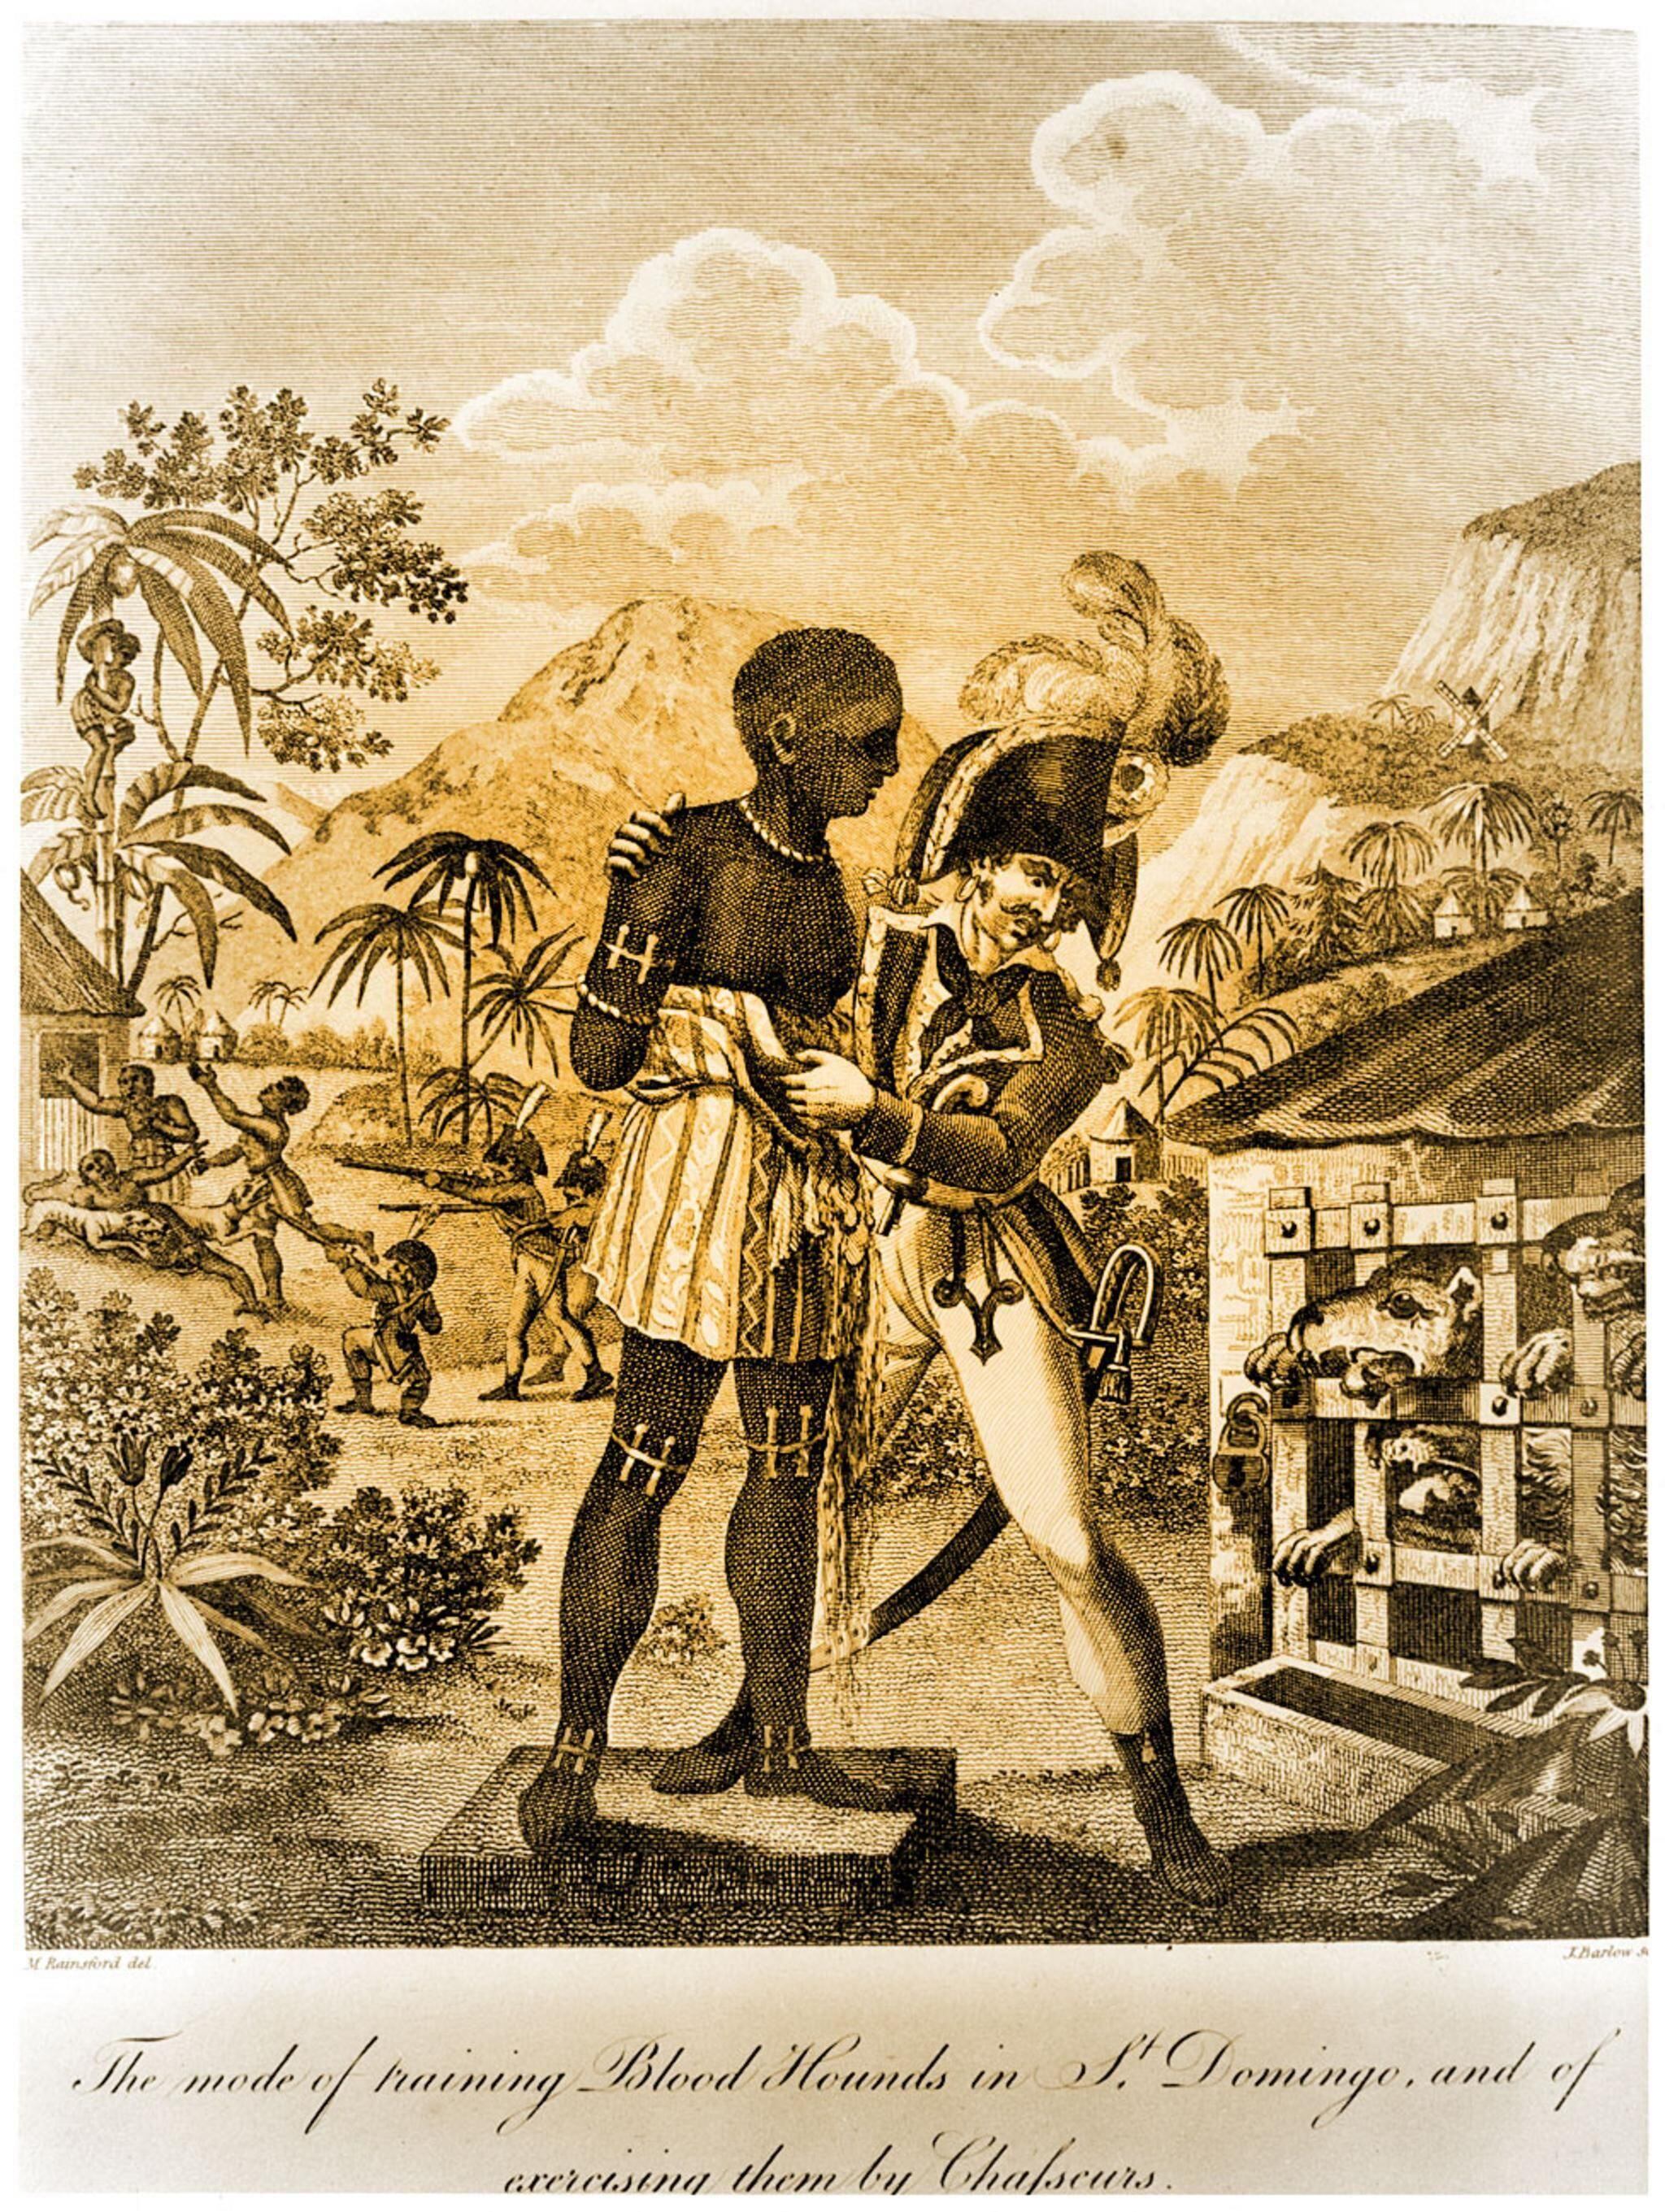 Engraving of a sketch by British soldier Marcus Rainsford showing how hunting dogs were trained in Santo Domingo using slaves, 1791-1803.  (GET IMAGES).